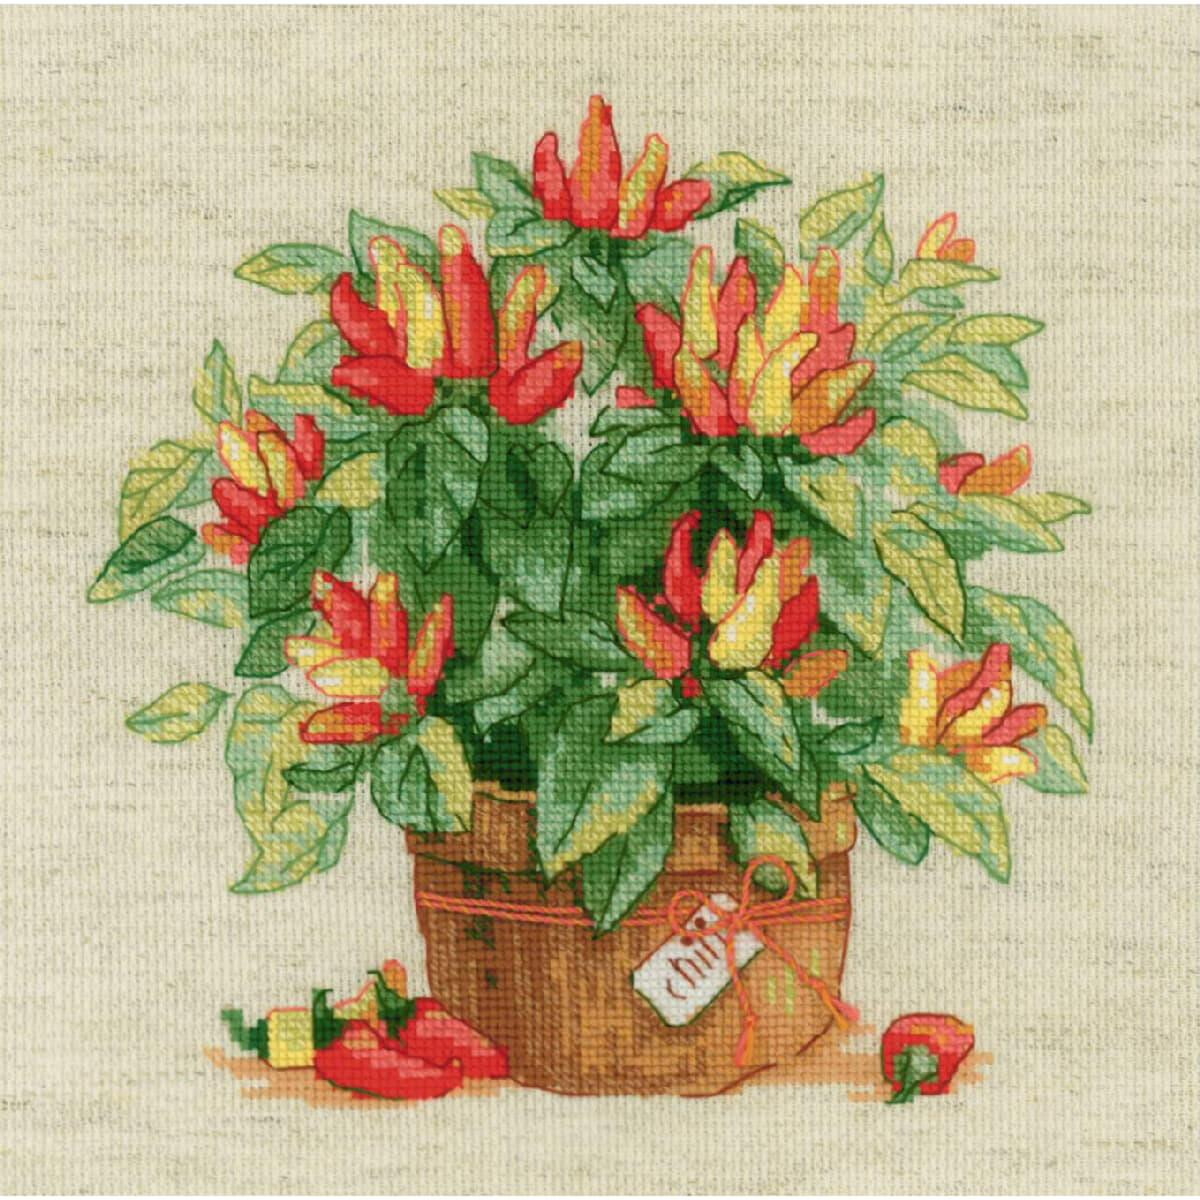 Riolis counted cross stitch kit "Pepper in a...